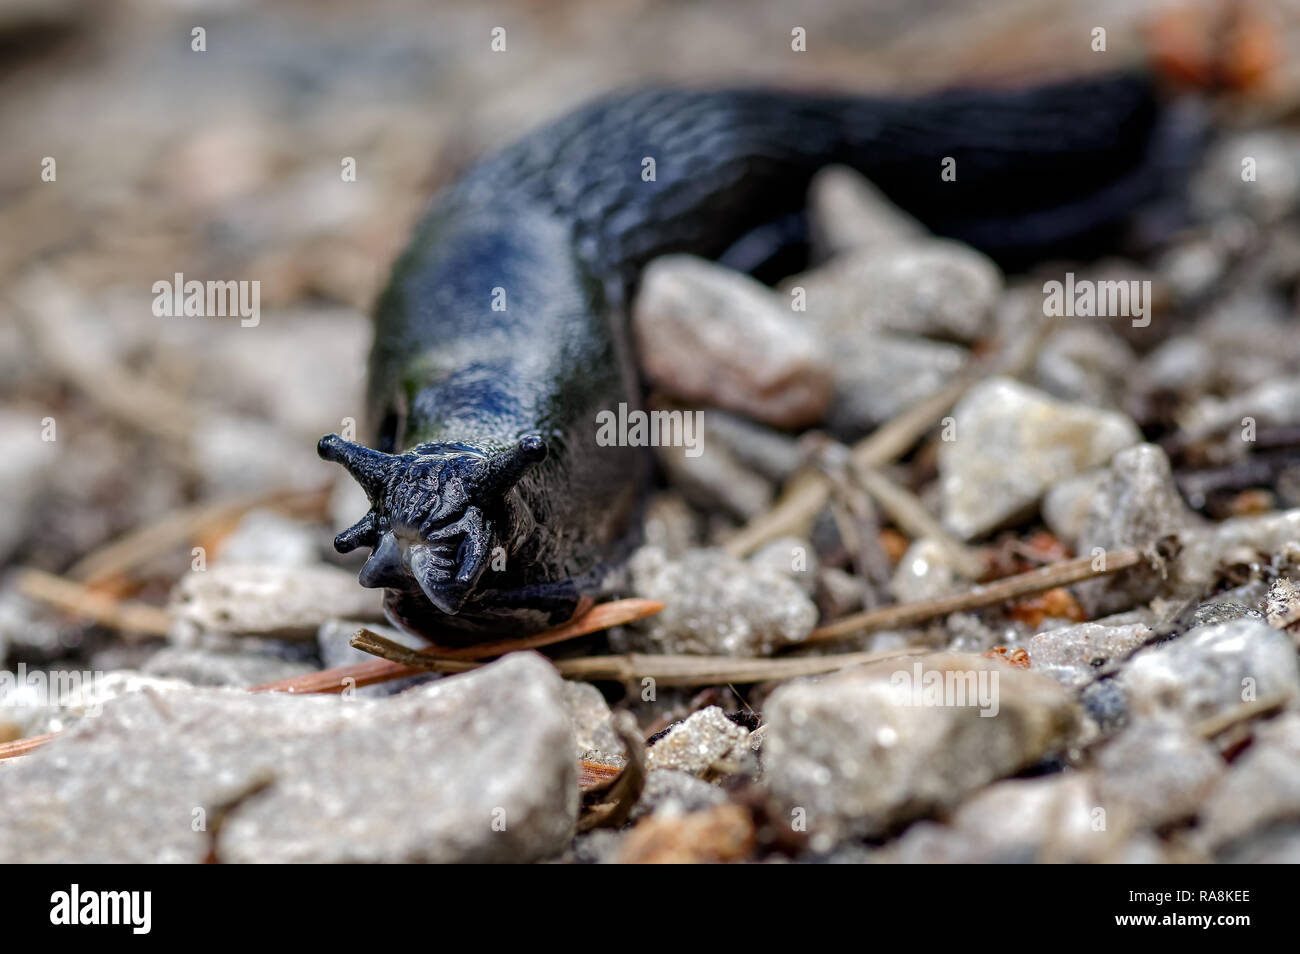 This is a typical jet black form of the Large Black Slug (Arion ater) from the wetlands and uplands of Northern Scotland. Seen here traversing a path. Stock Photo